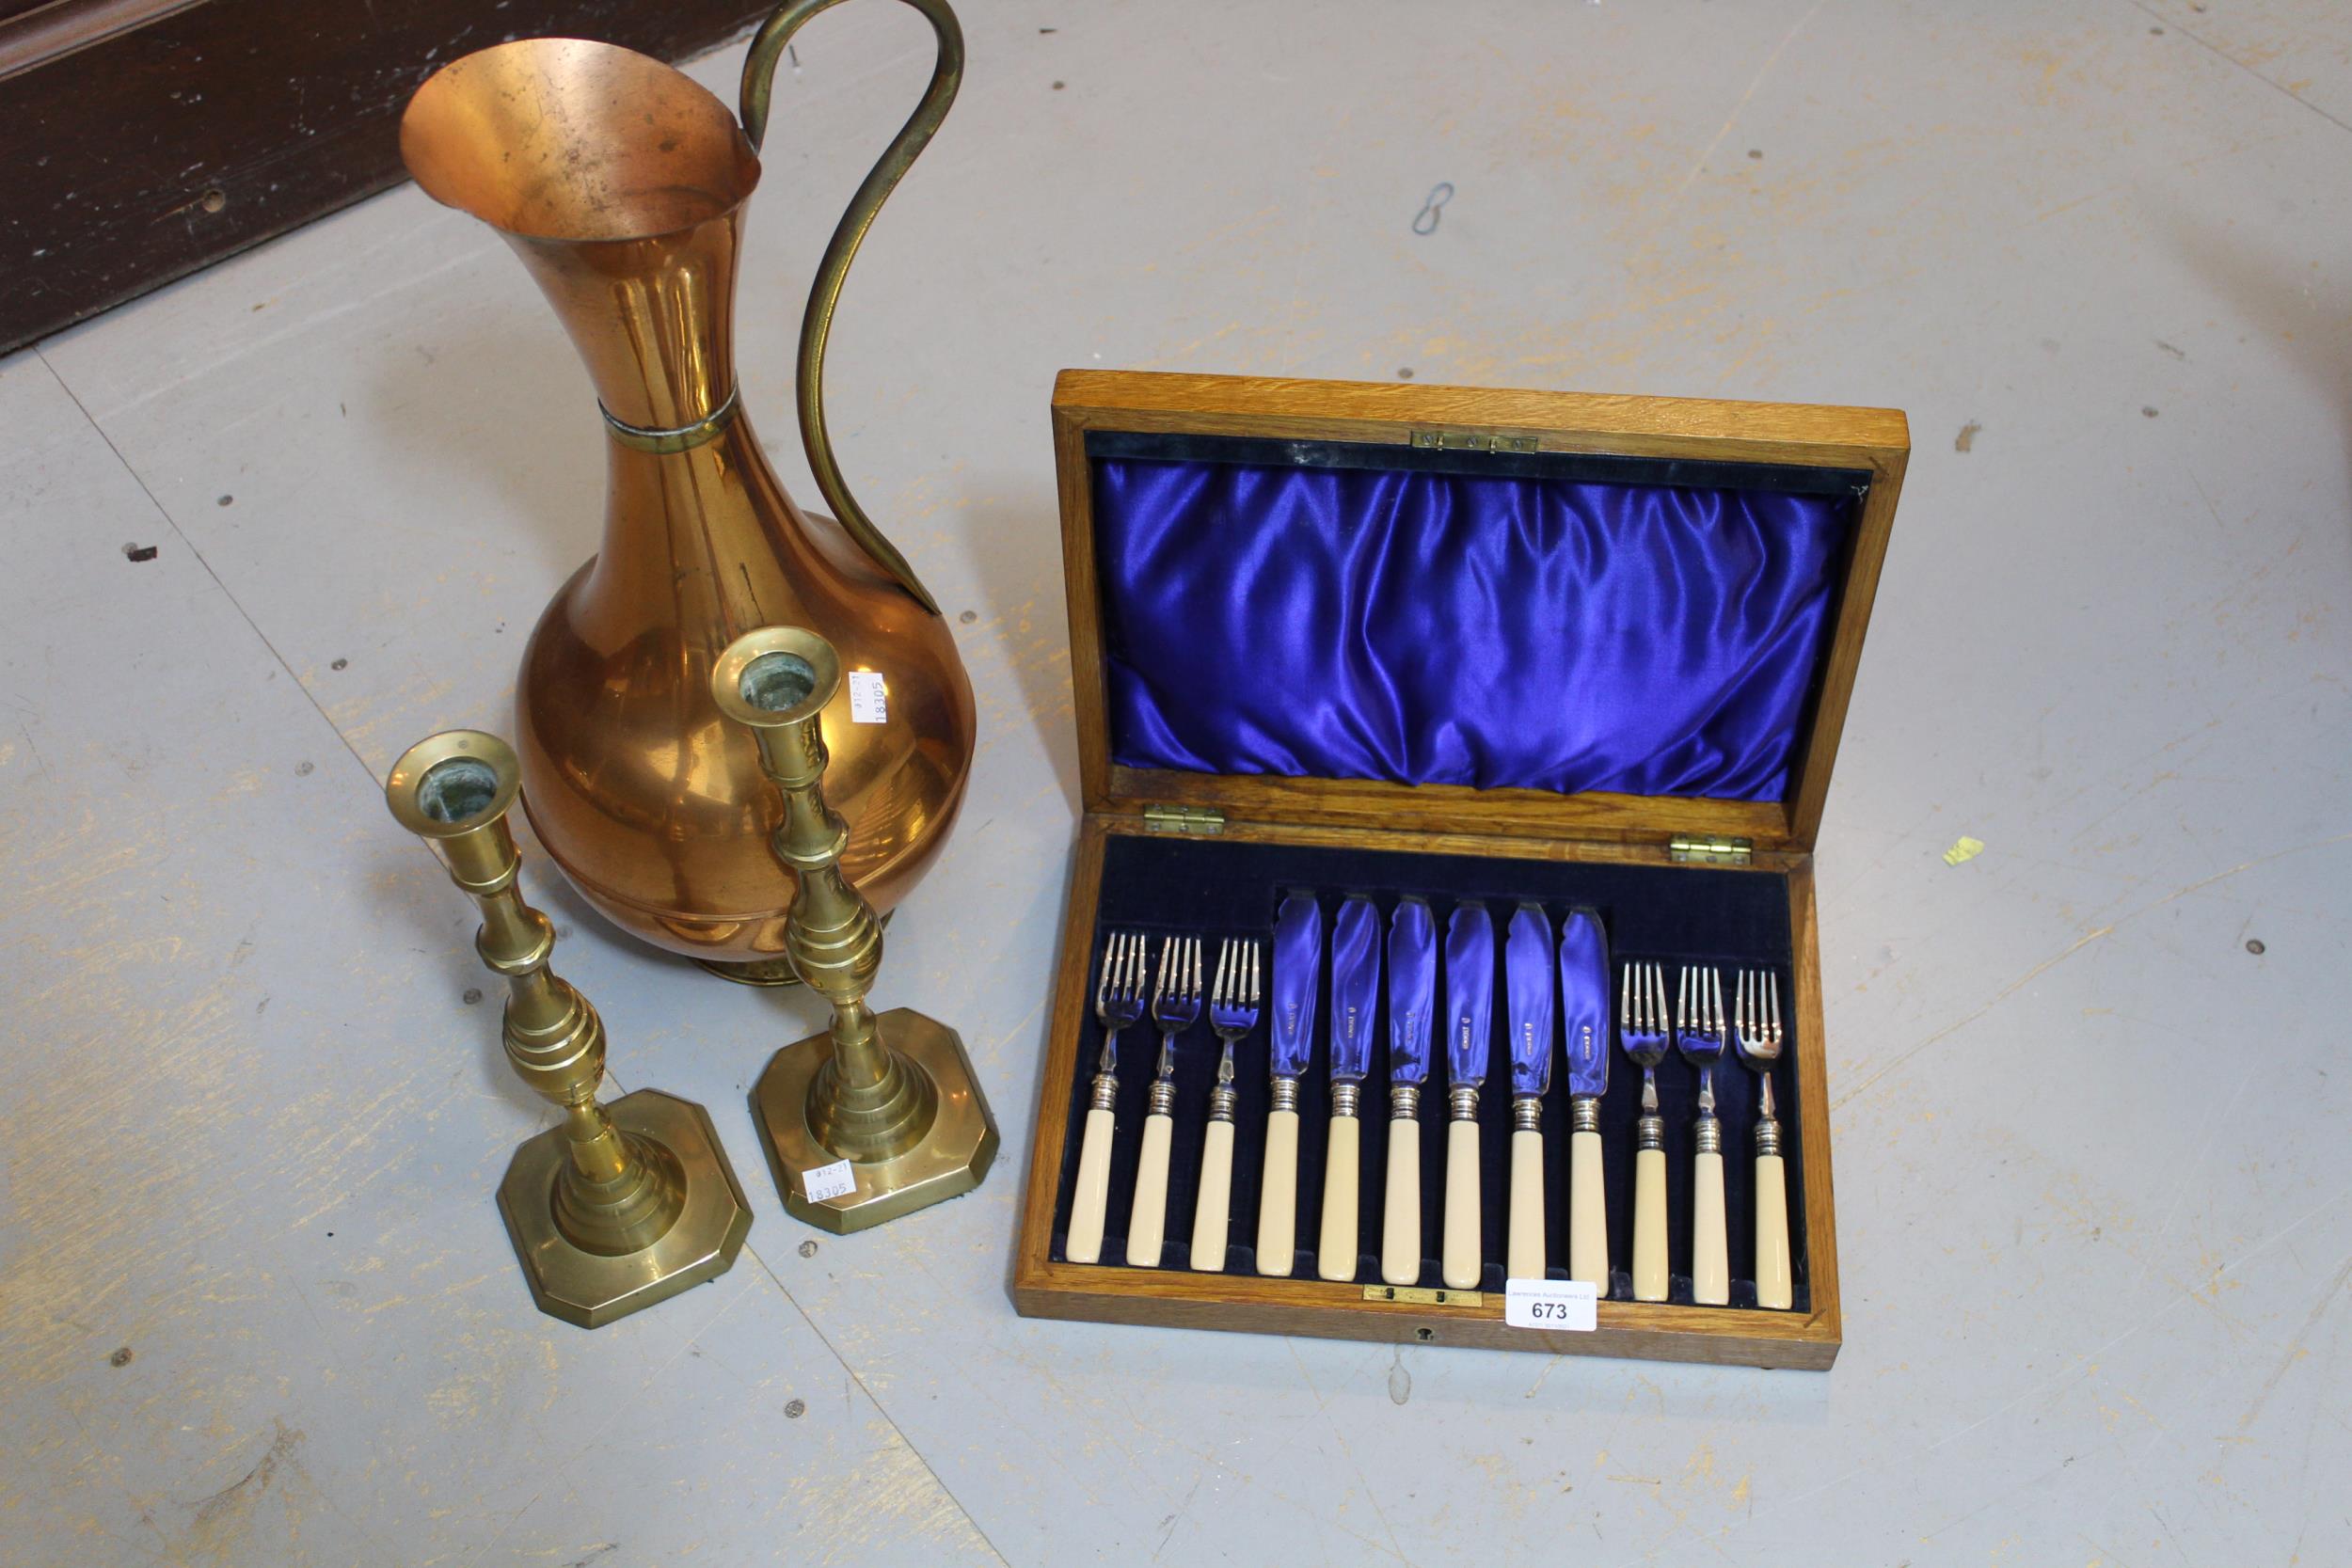 Oak cased six place set of fish knives and forks, pair of brass candlesticks and a copper jug